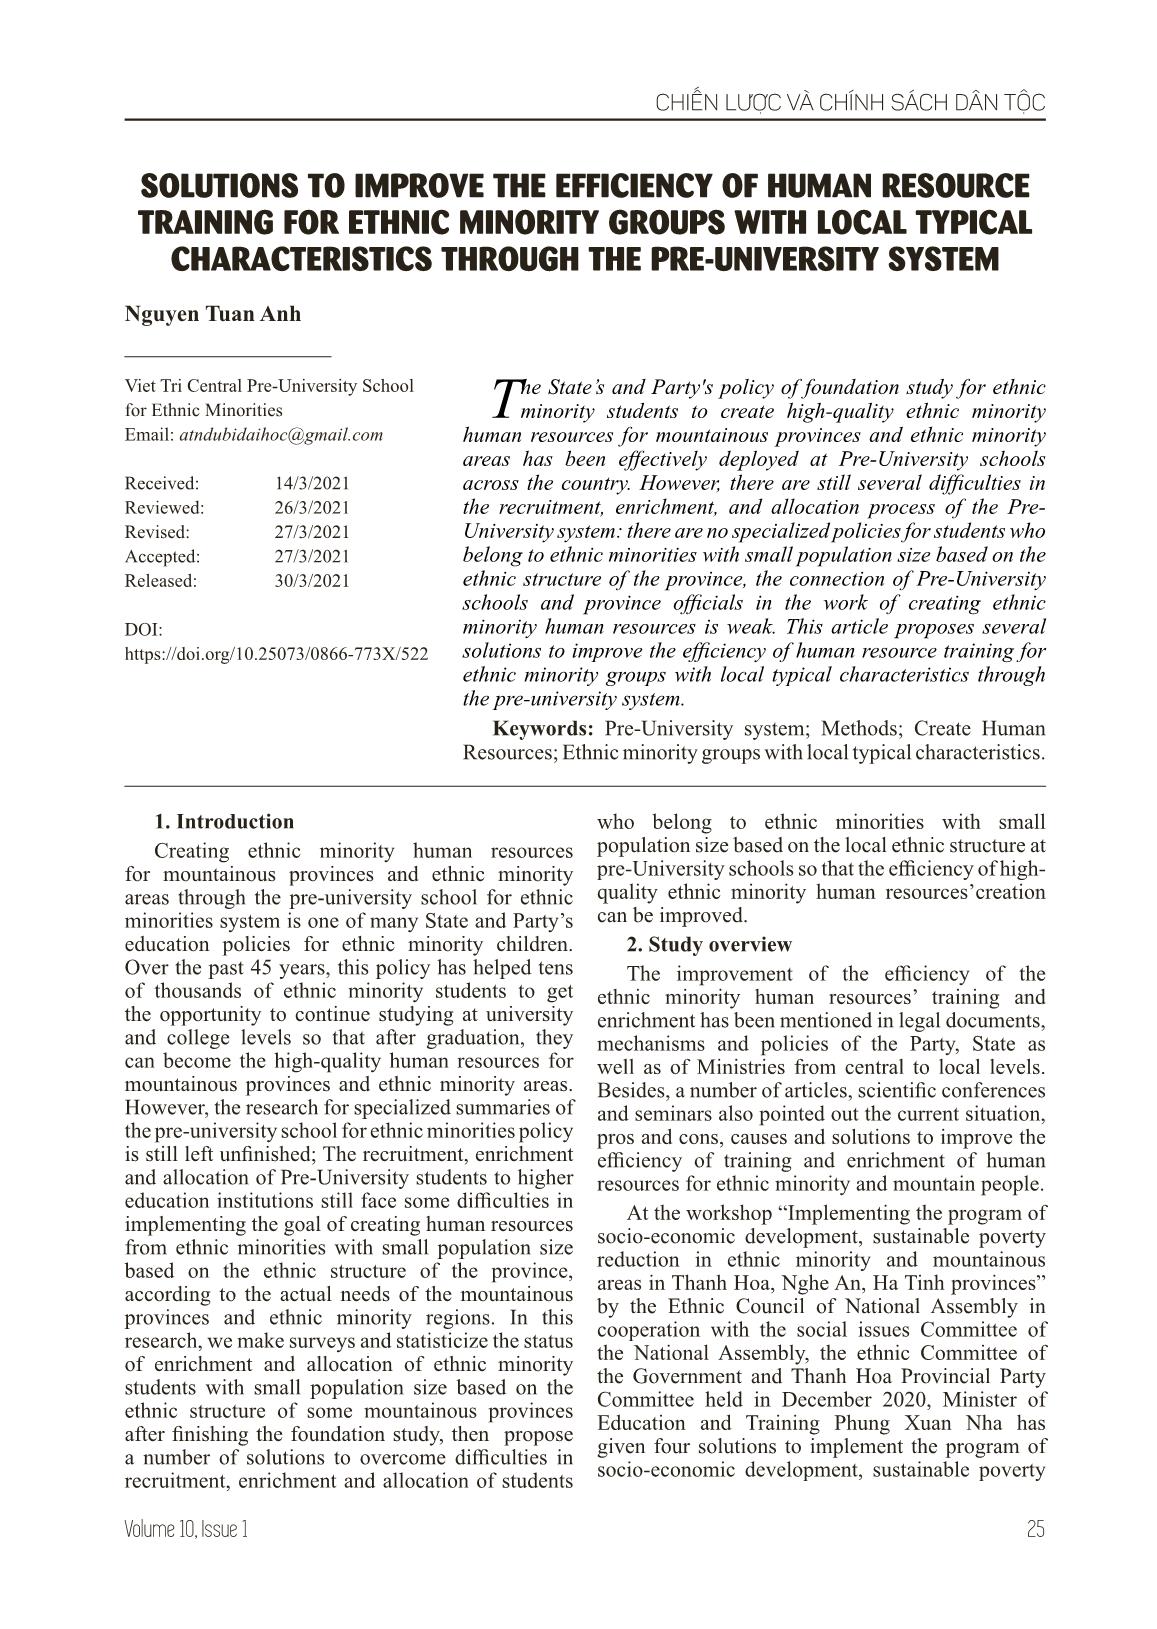 Solutions to improve the efficiency of human resource training for ethnic minority groups with local typical characteristics through the pre-university system trang 1